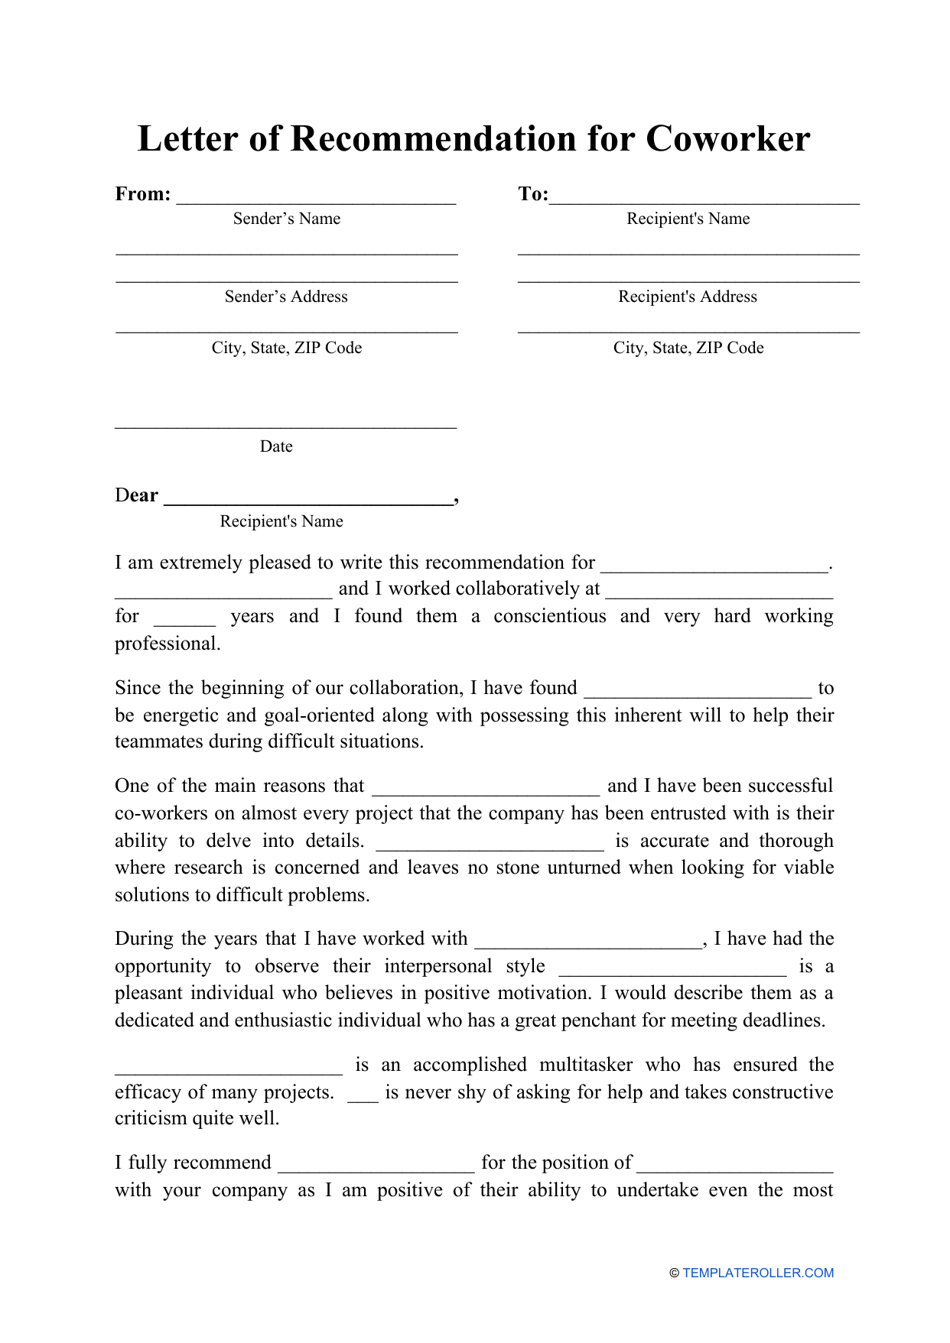 letter-of-recommendation-for-coworker-template-download-printable-pdf-templateroller